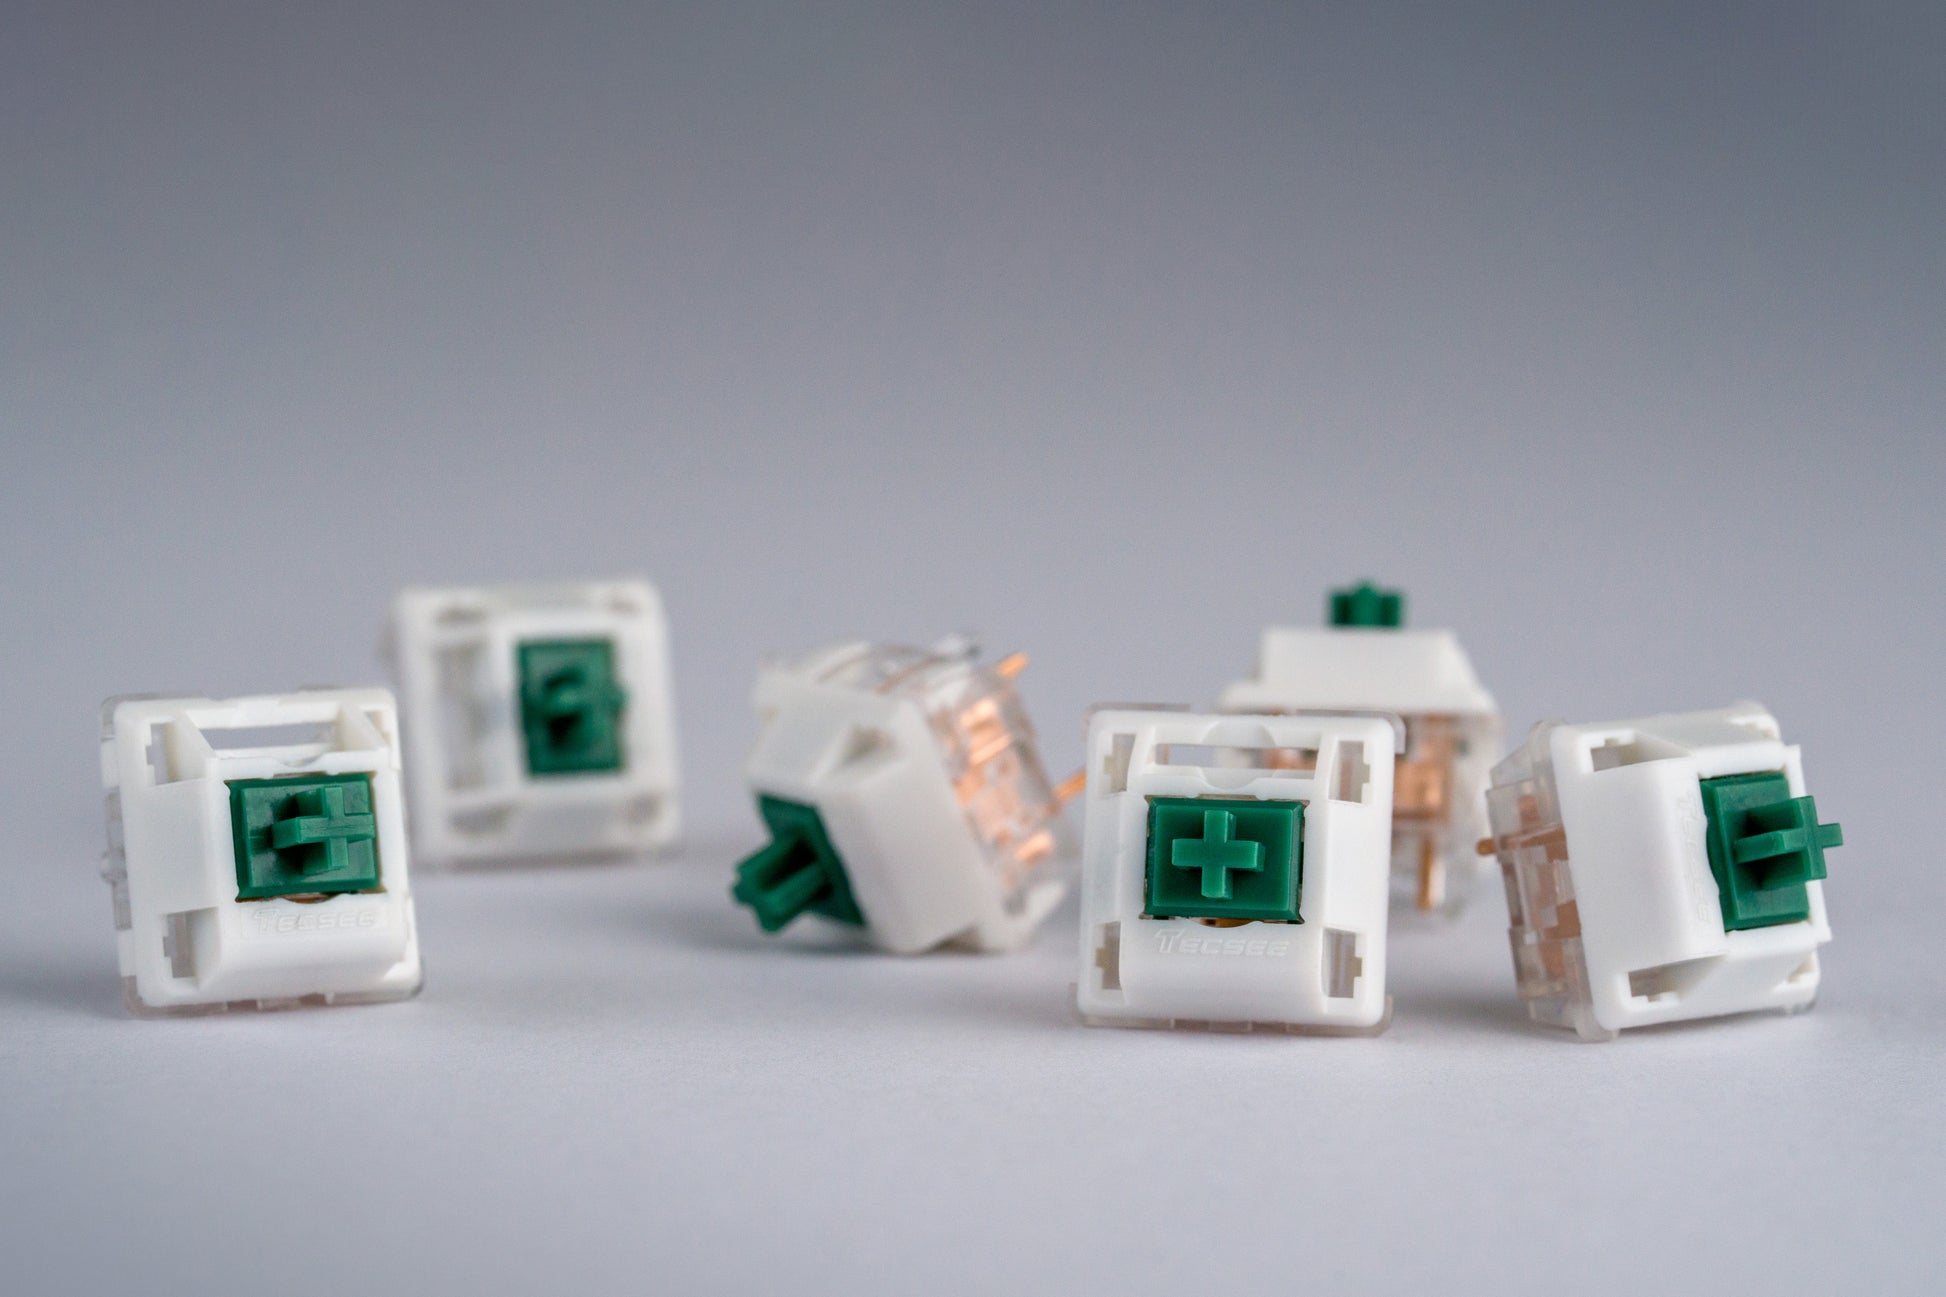 Close-up shots of BBN Linear mechanical keyboard switches featuring white and transparent housing and green stems